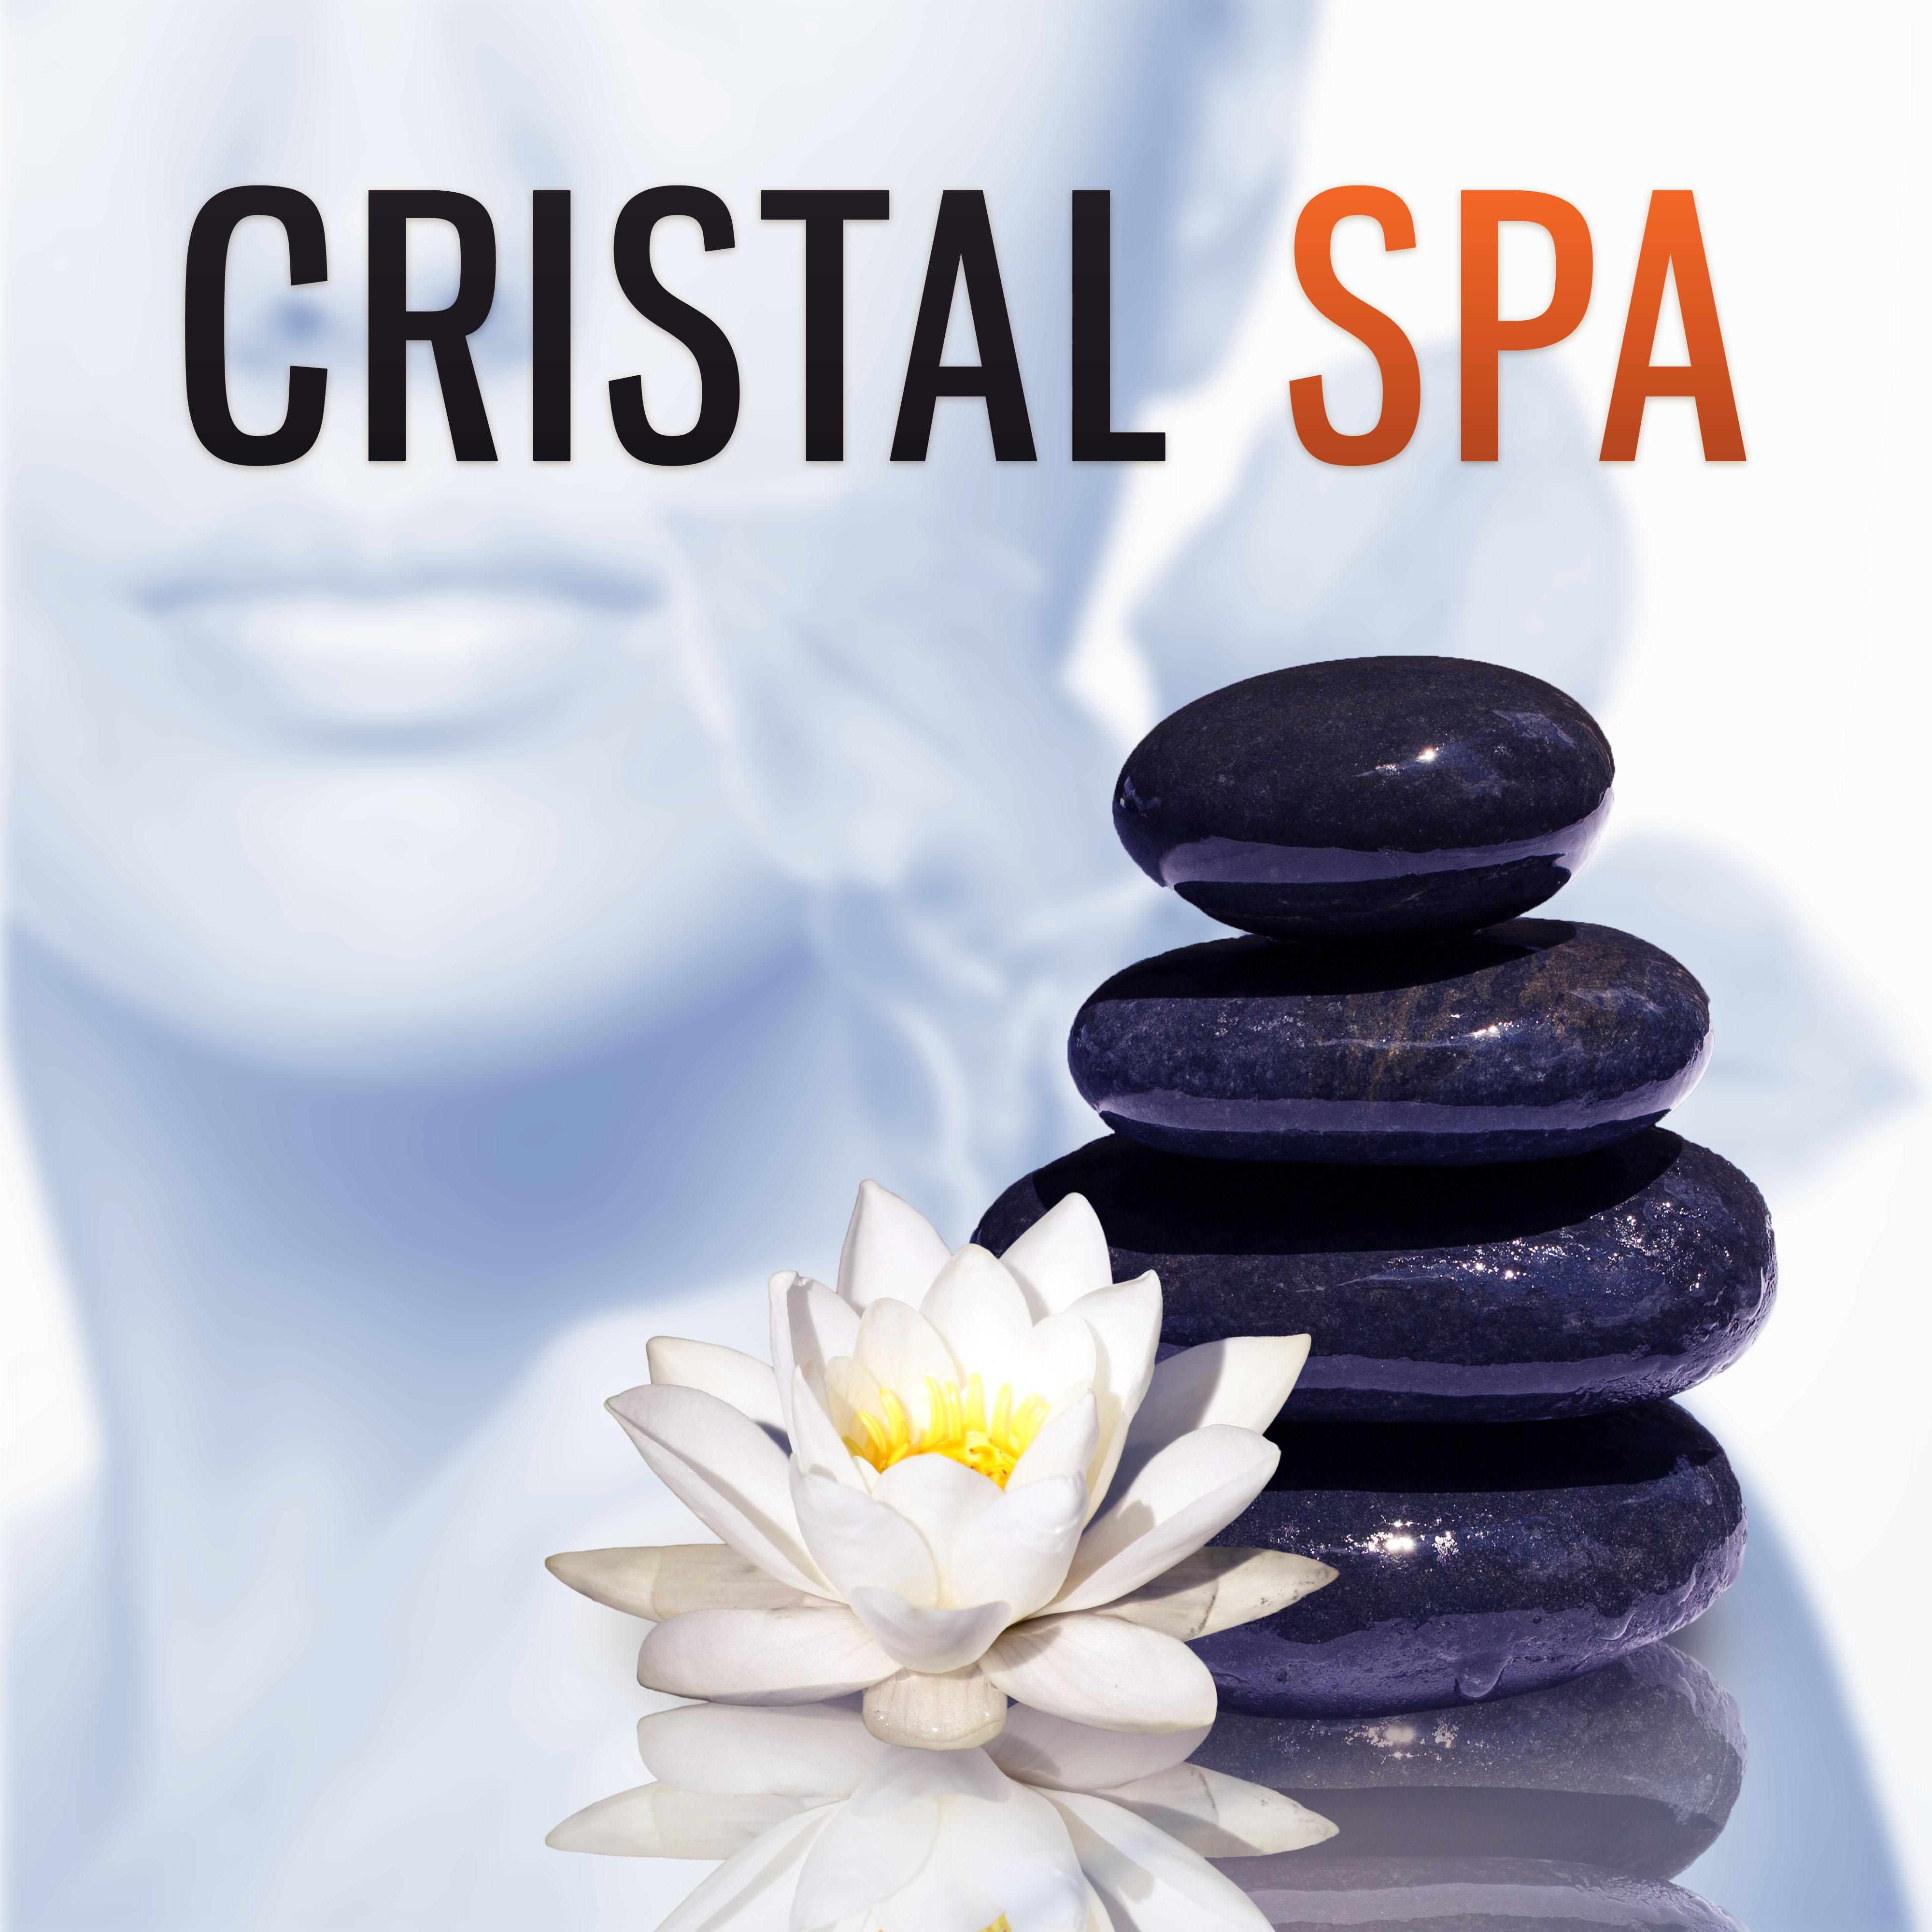 Cristal Spa - Energy of Natural Healing, Gentle Massage Music for Aromatherapy, Asian Atmosphere